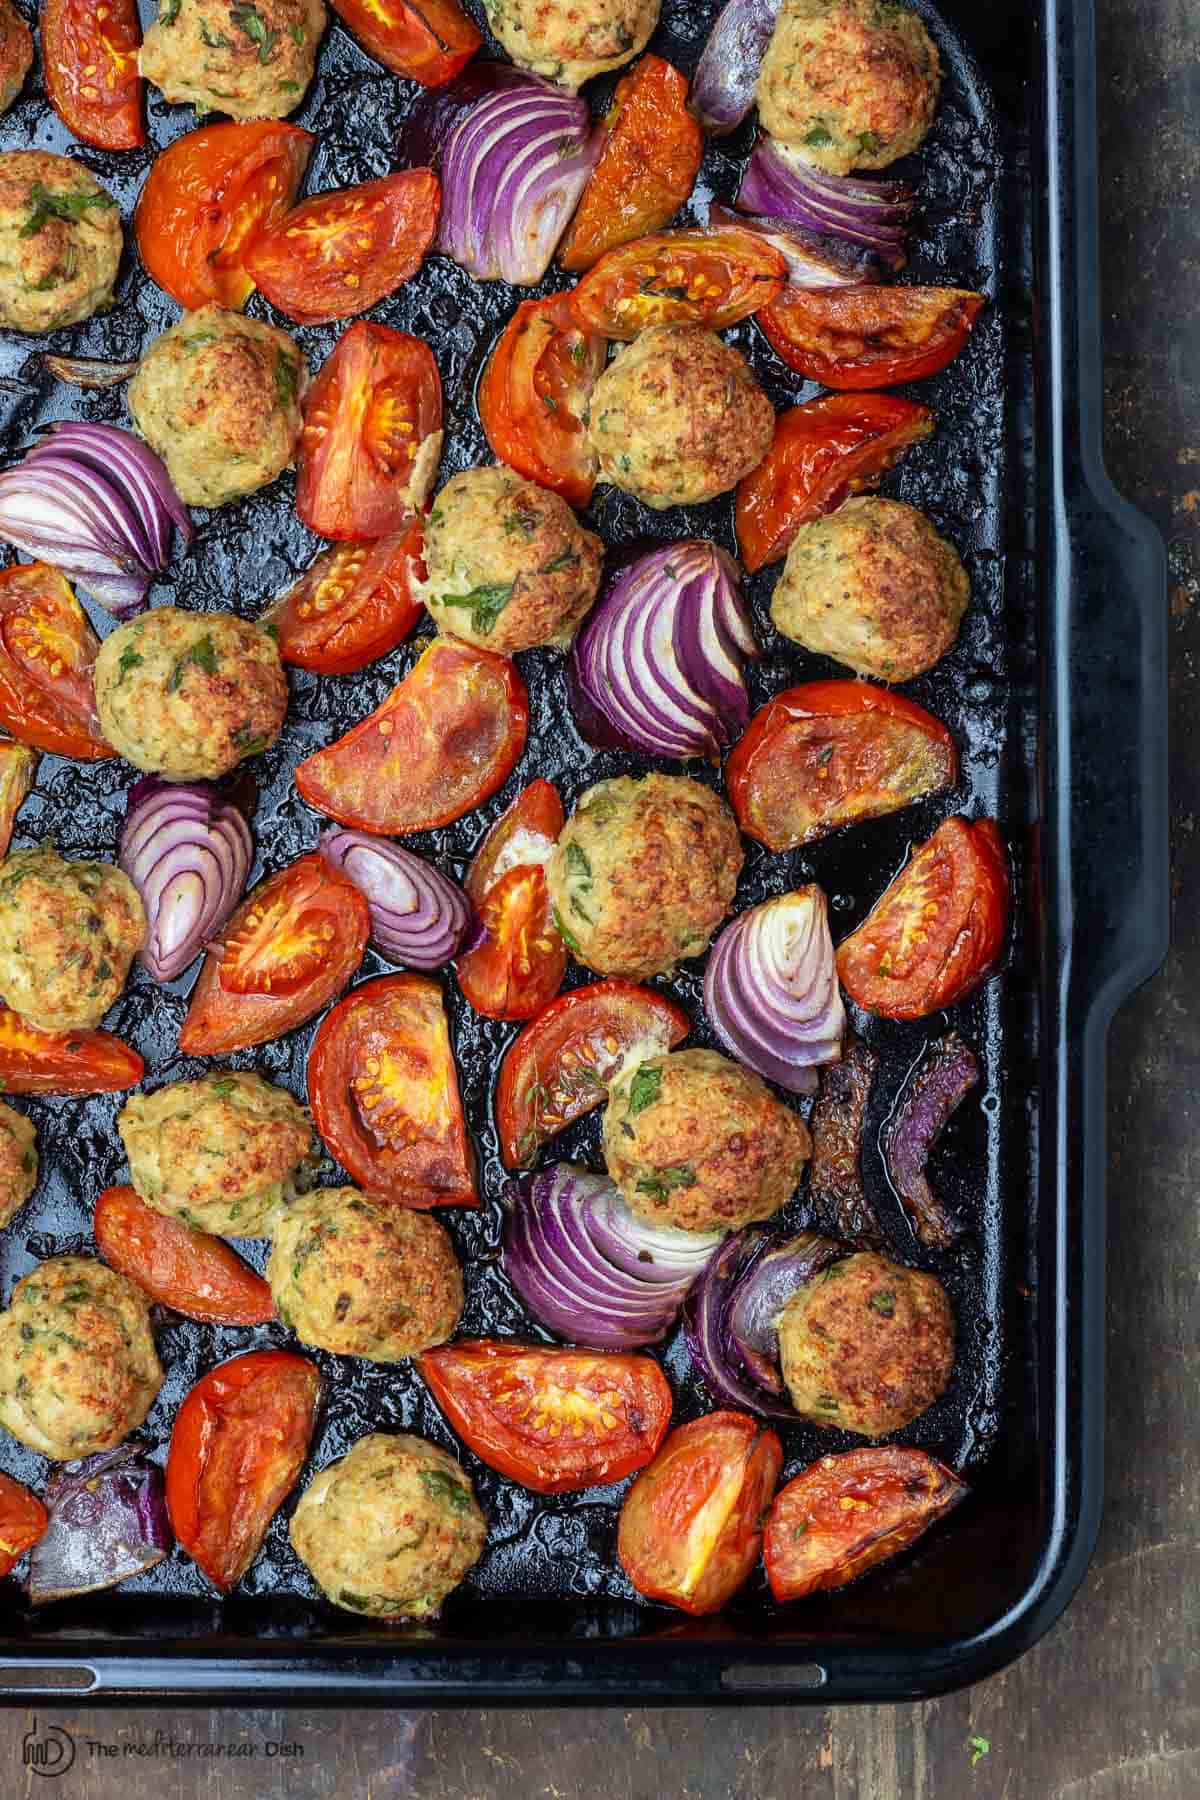 Best Baked Chicken Meatballs Italian Style The Mediterranean Dish,Grilled Pears Salad